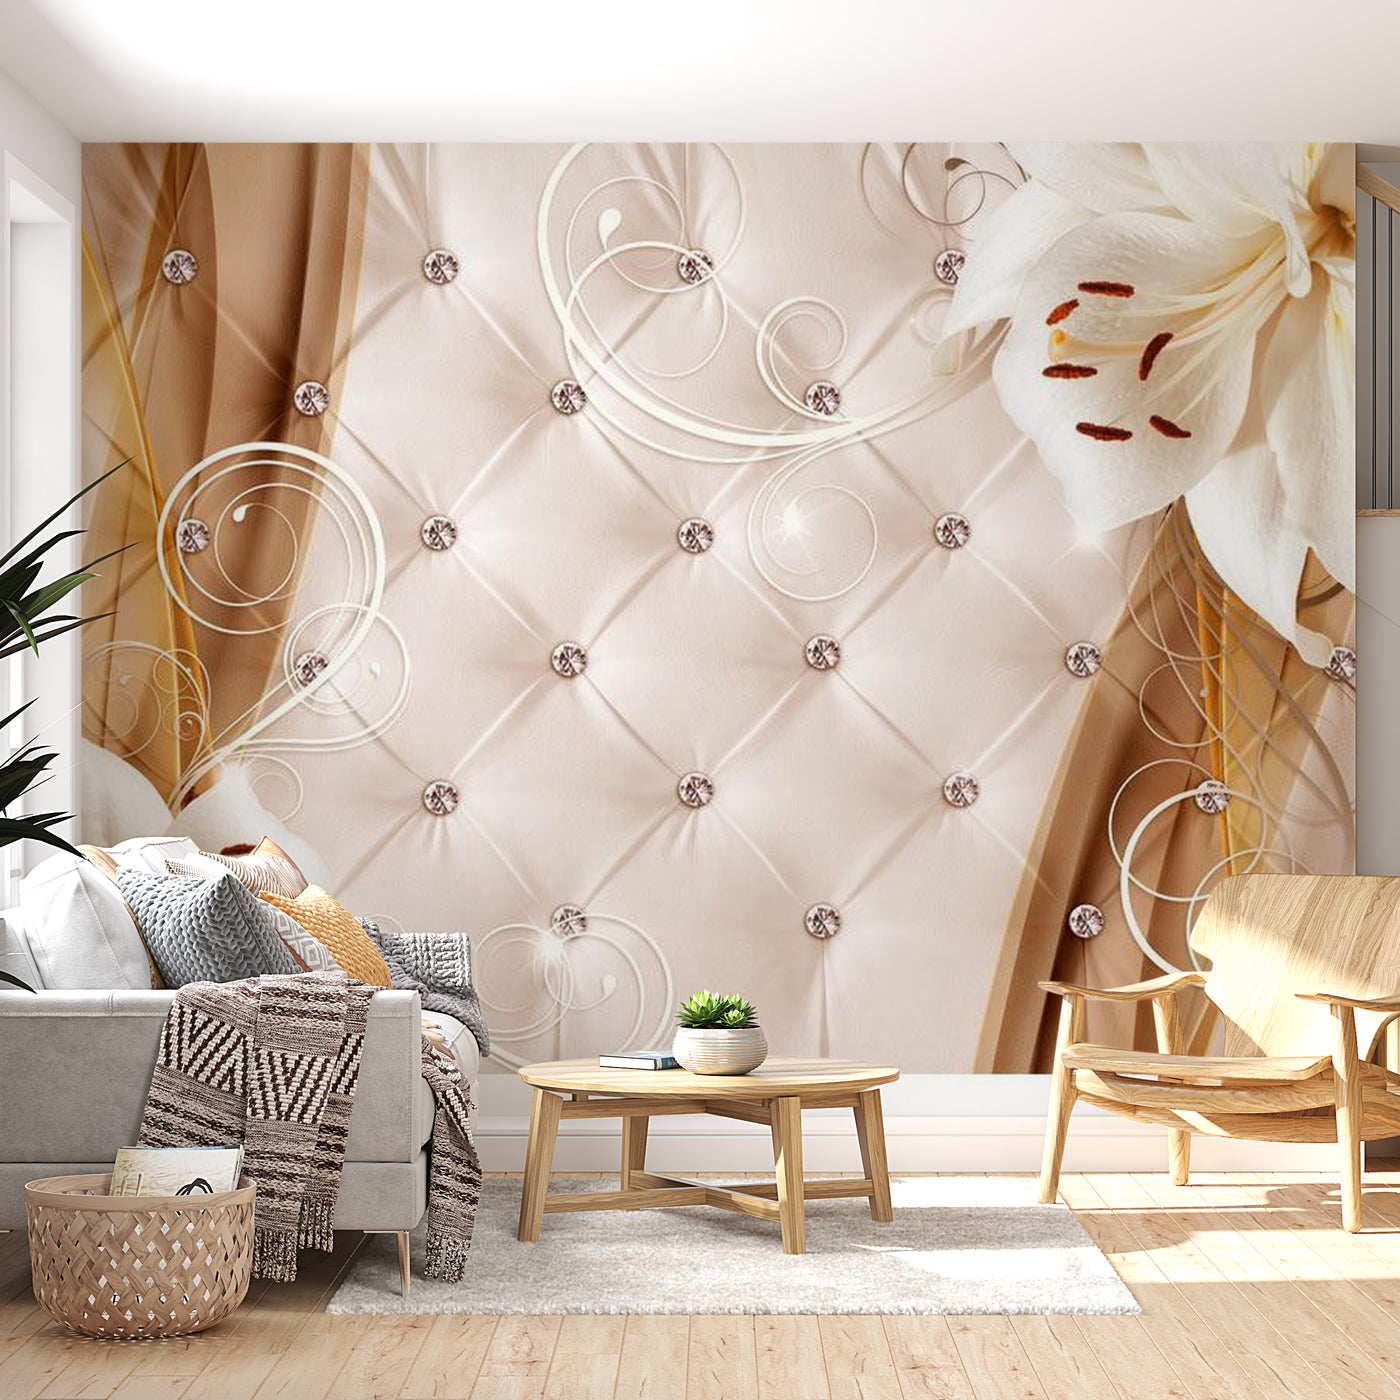 Peel & Stick Floral Wall Mural - Lilies And Gold - Removable Wall Decals